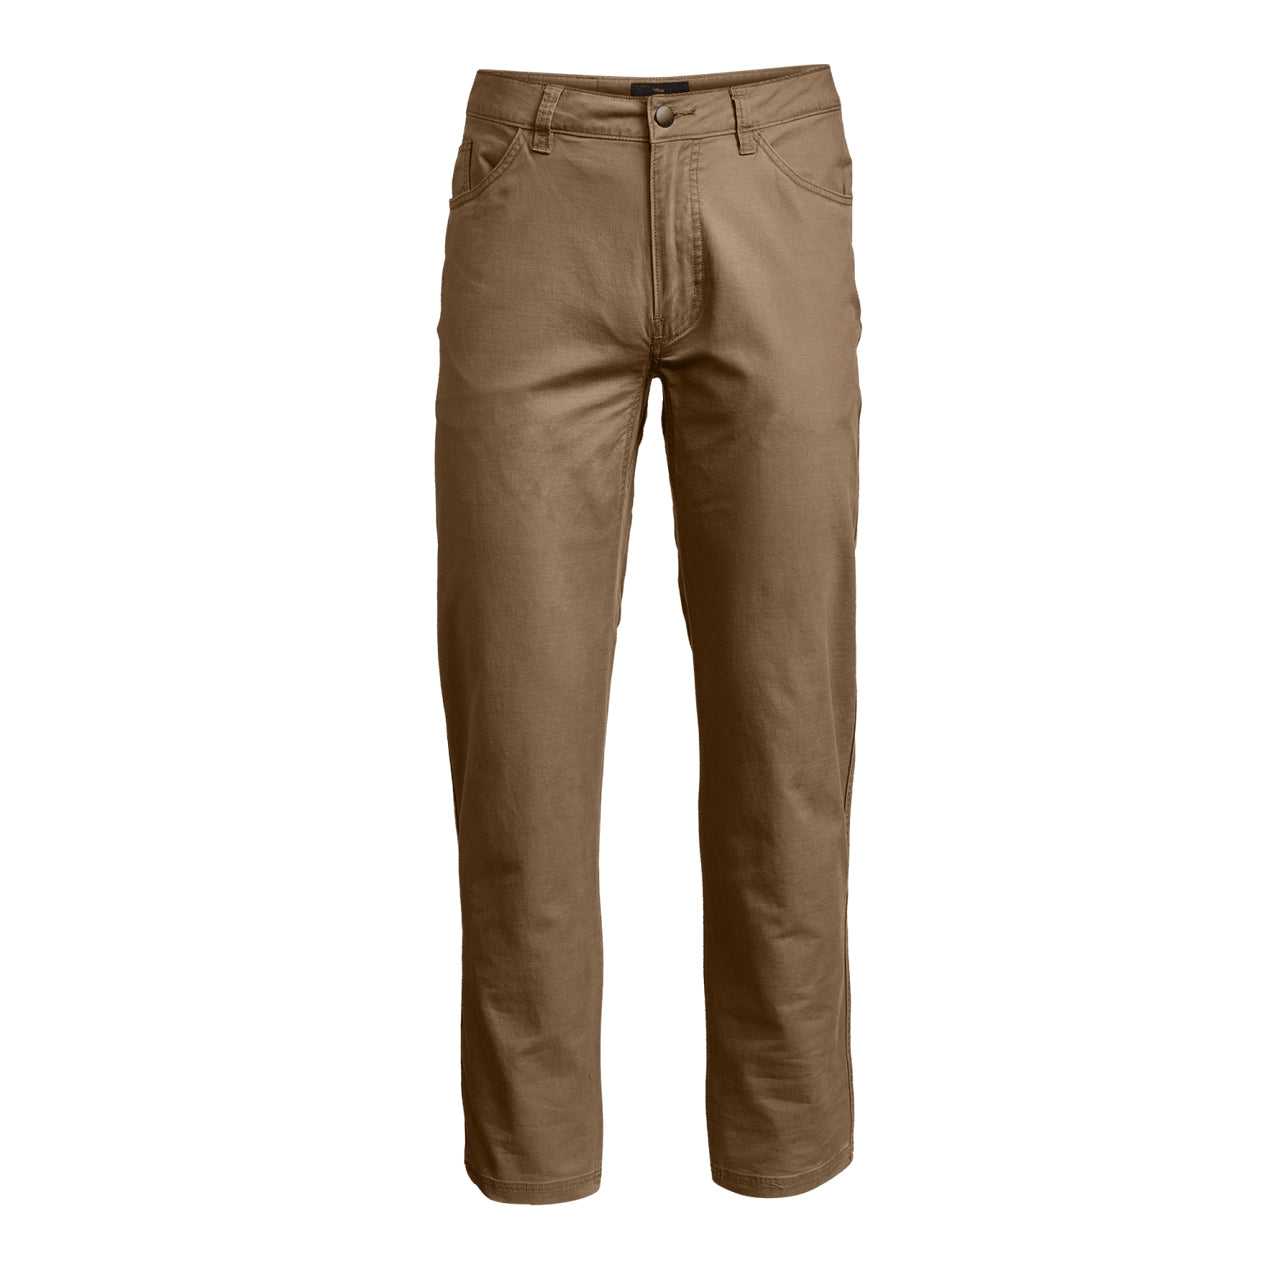 Sitka Everyday Pant in Tobacco